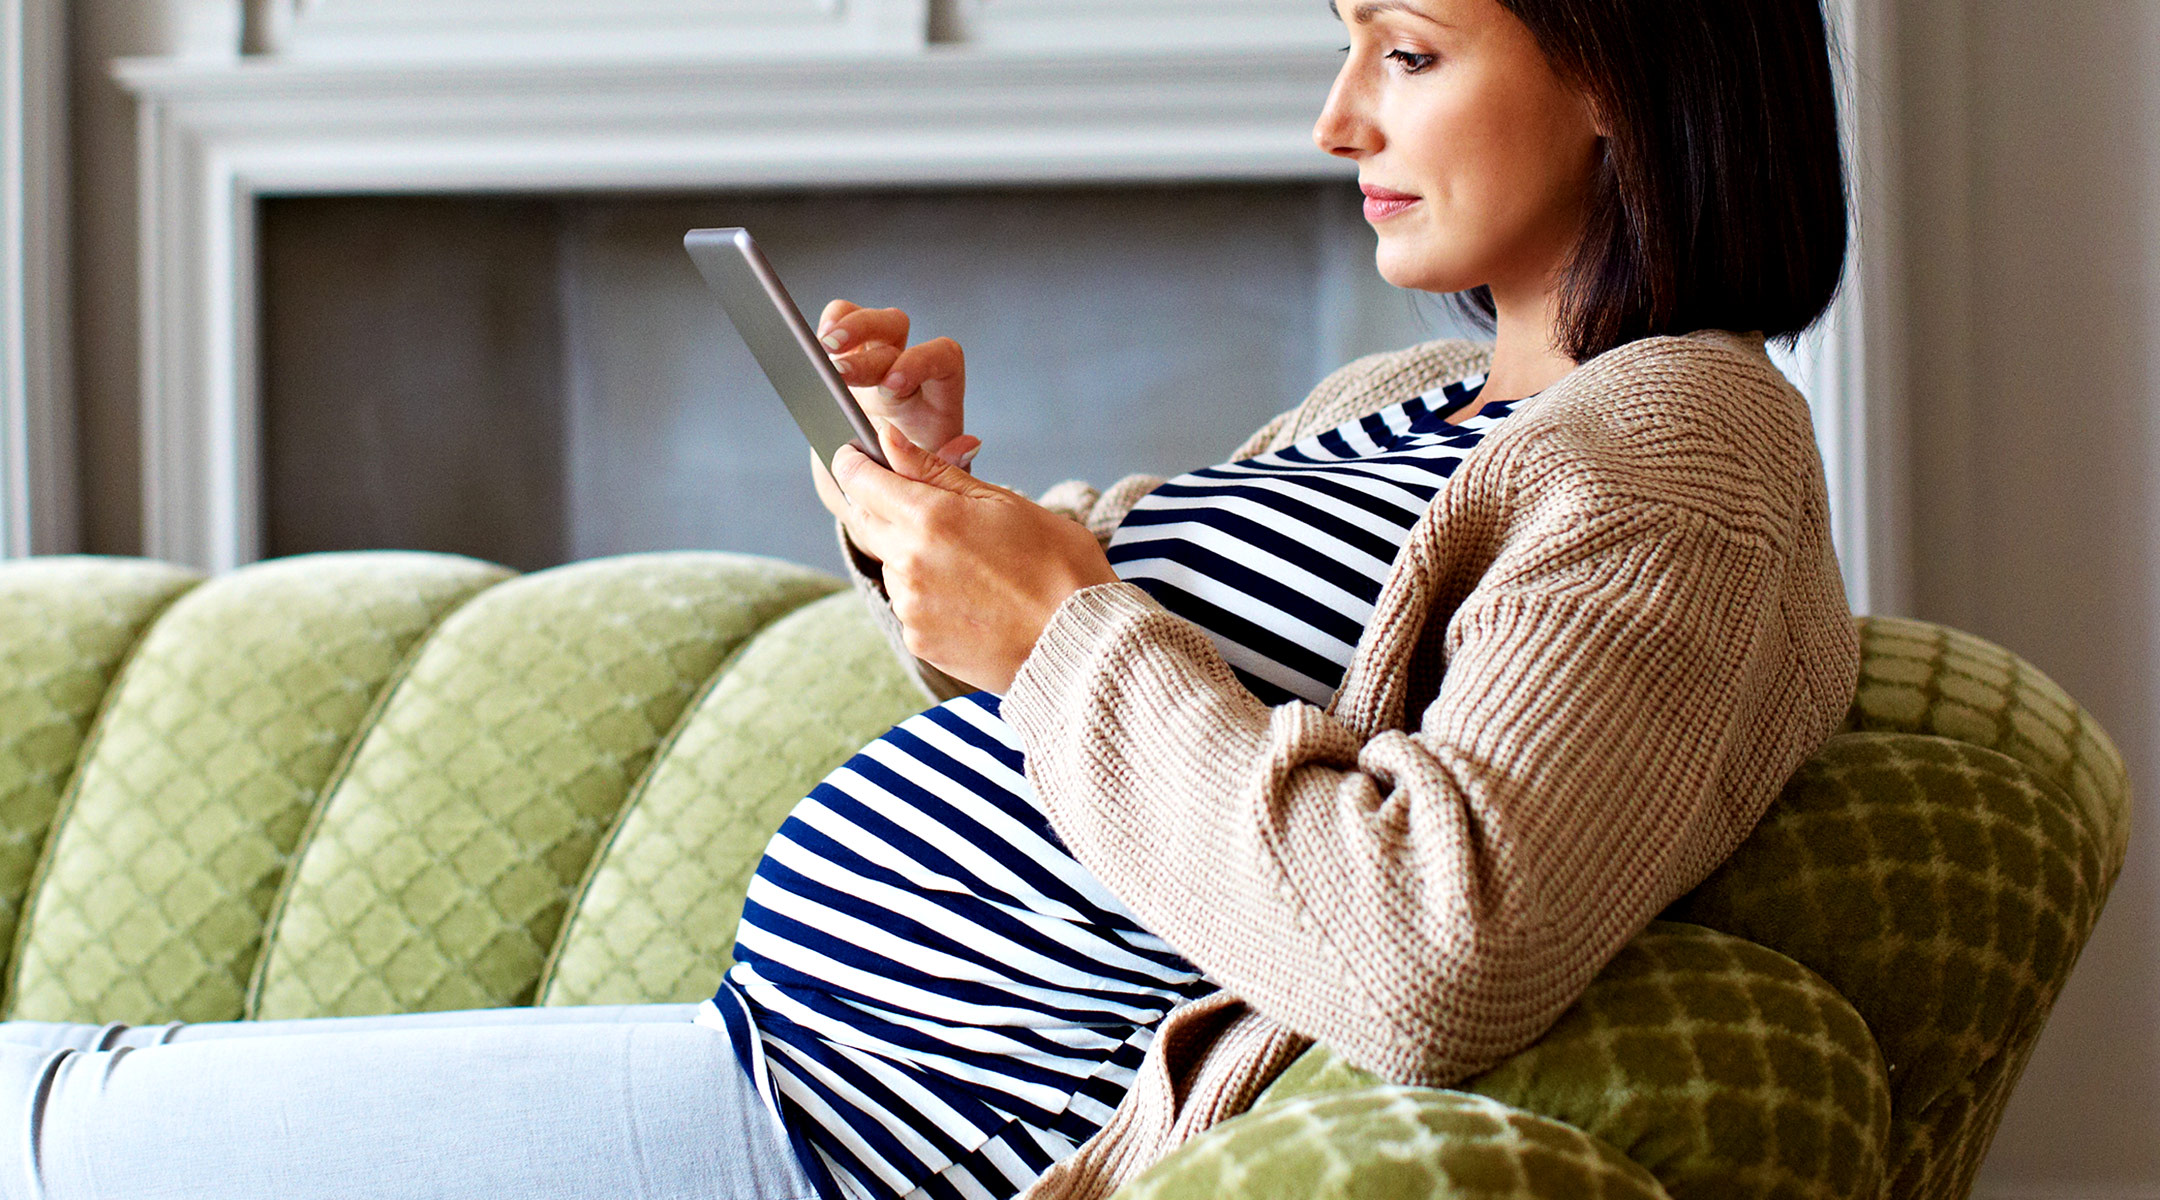 pregnant woman sitting on couch using tablet